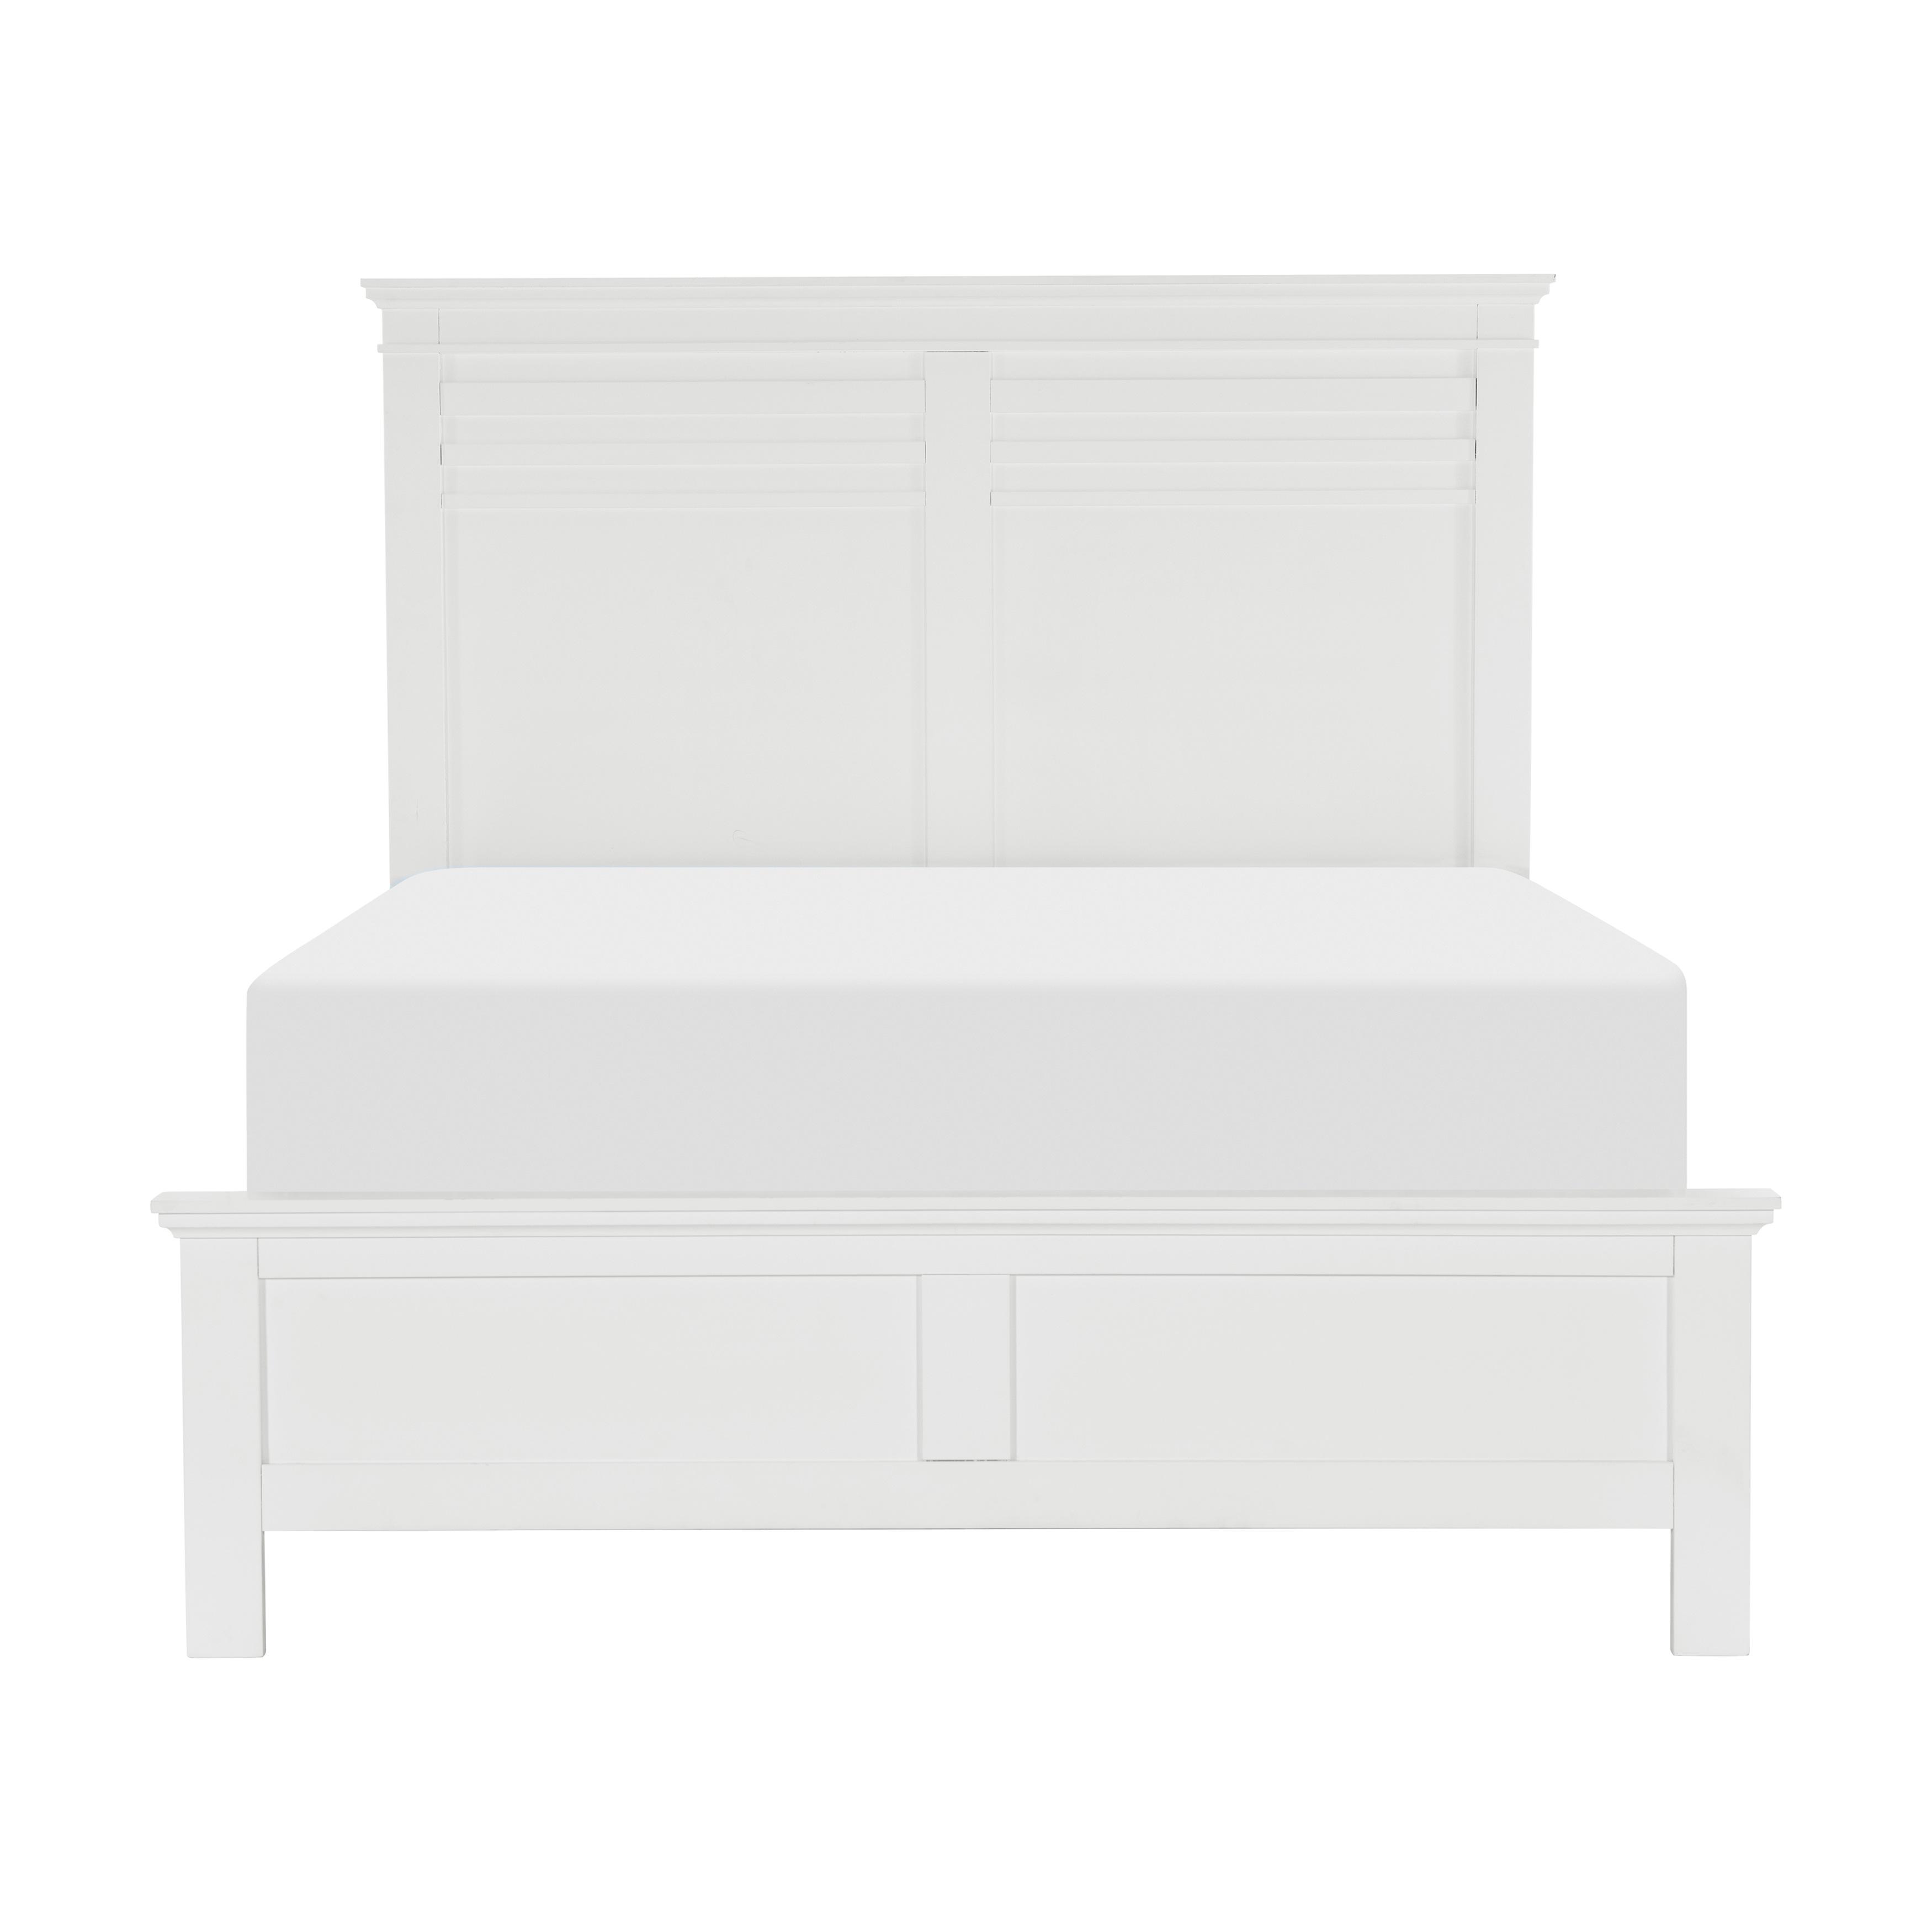 

    
Homelegance 1675WK-1CK*-3PC Blaire Farm Bed and 2 Nightstands Set White 1675WK-1CK*-3PC
